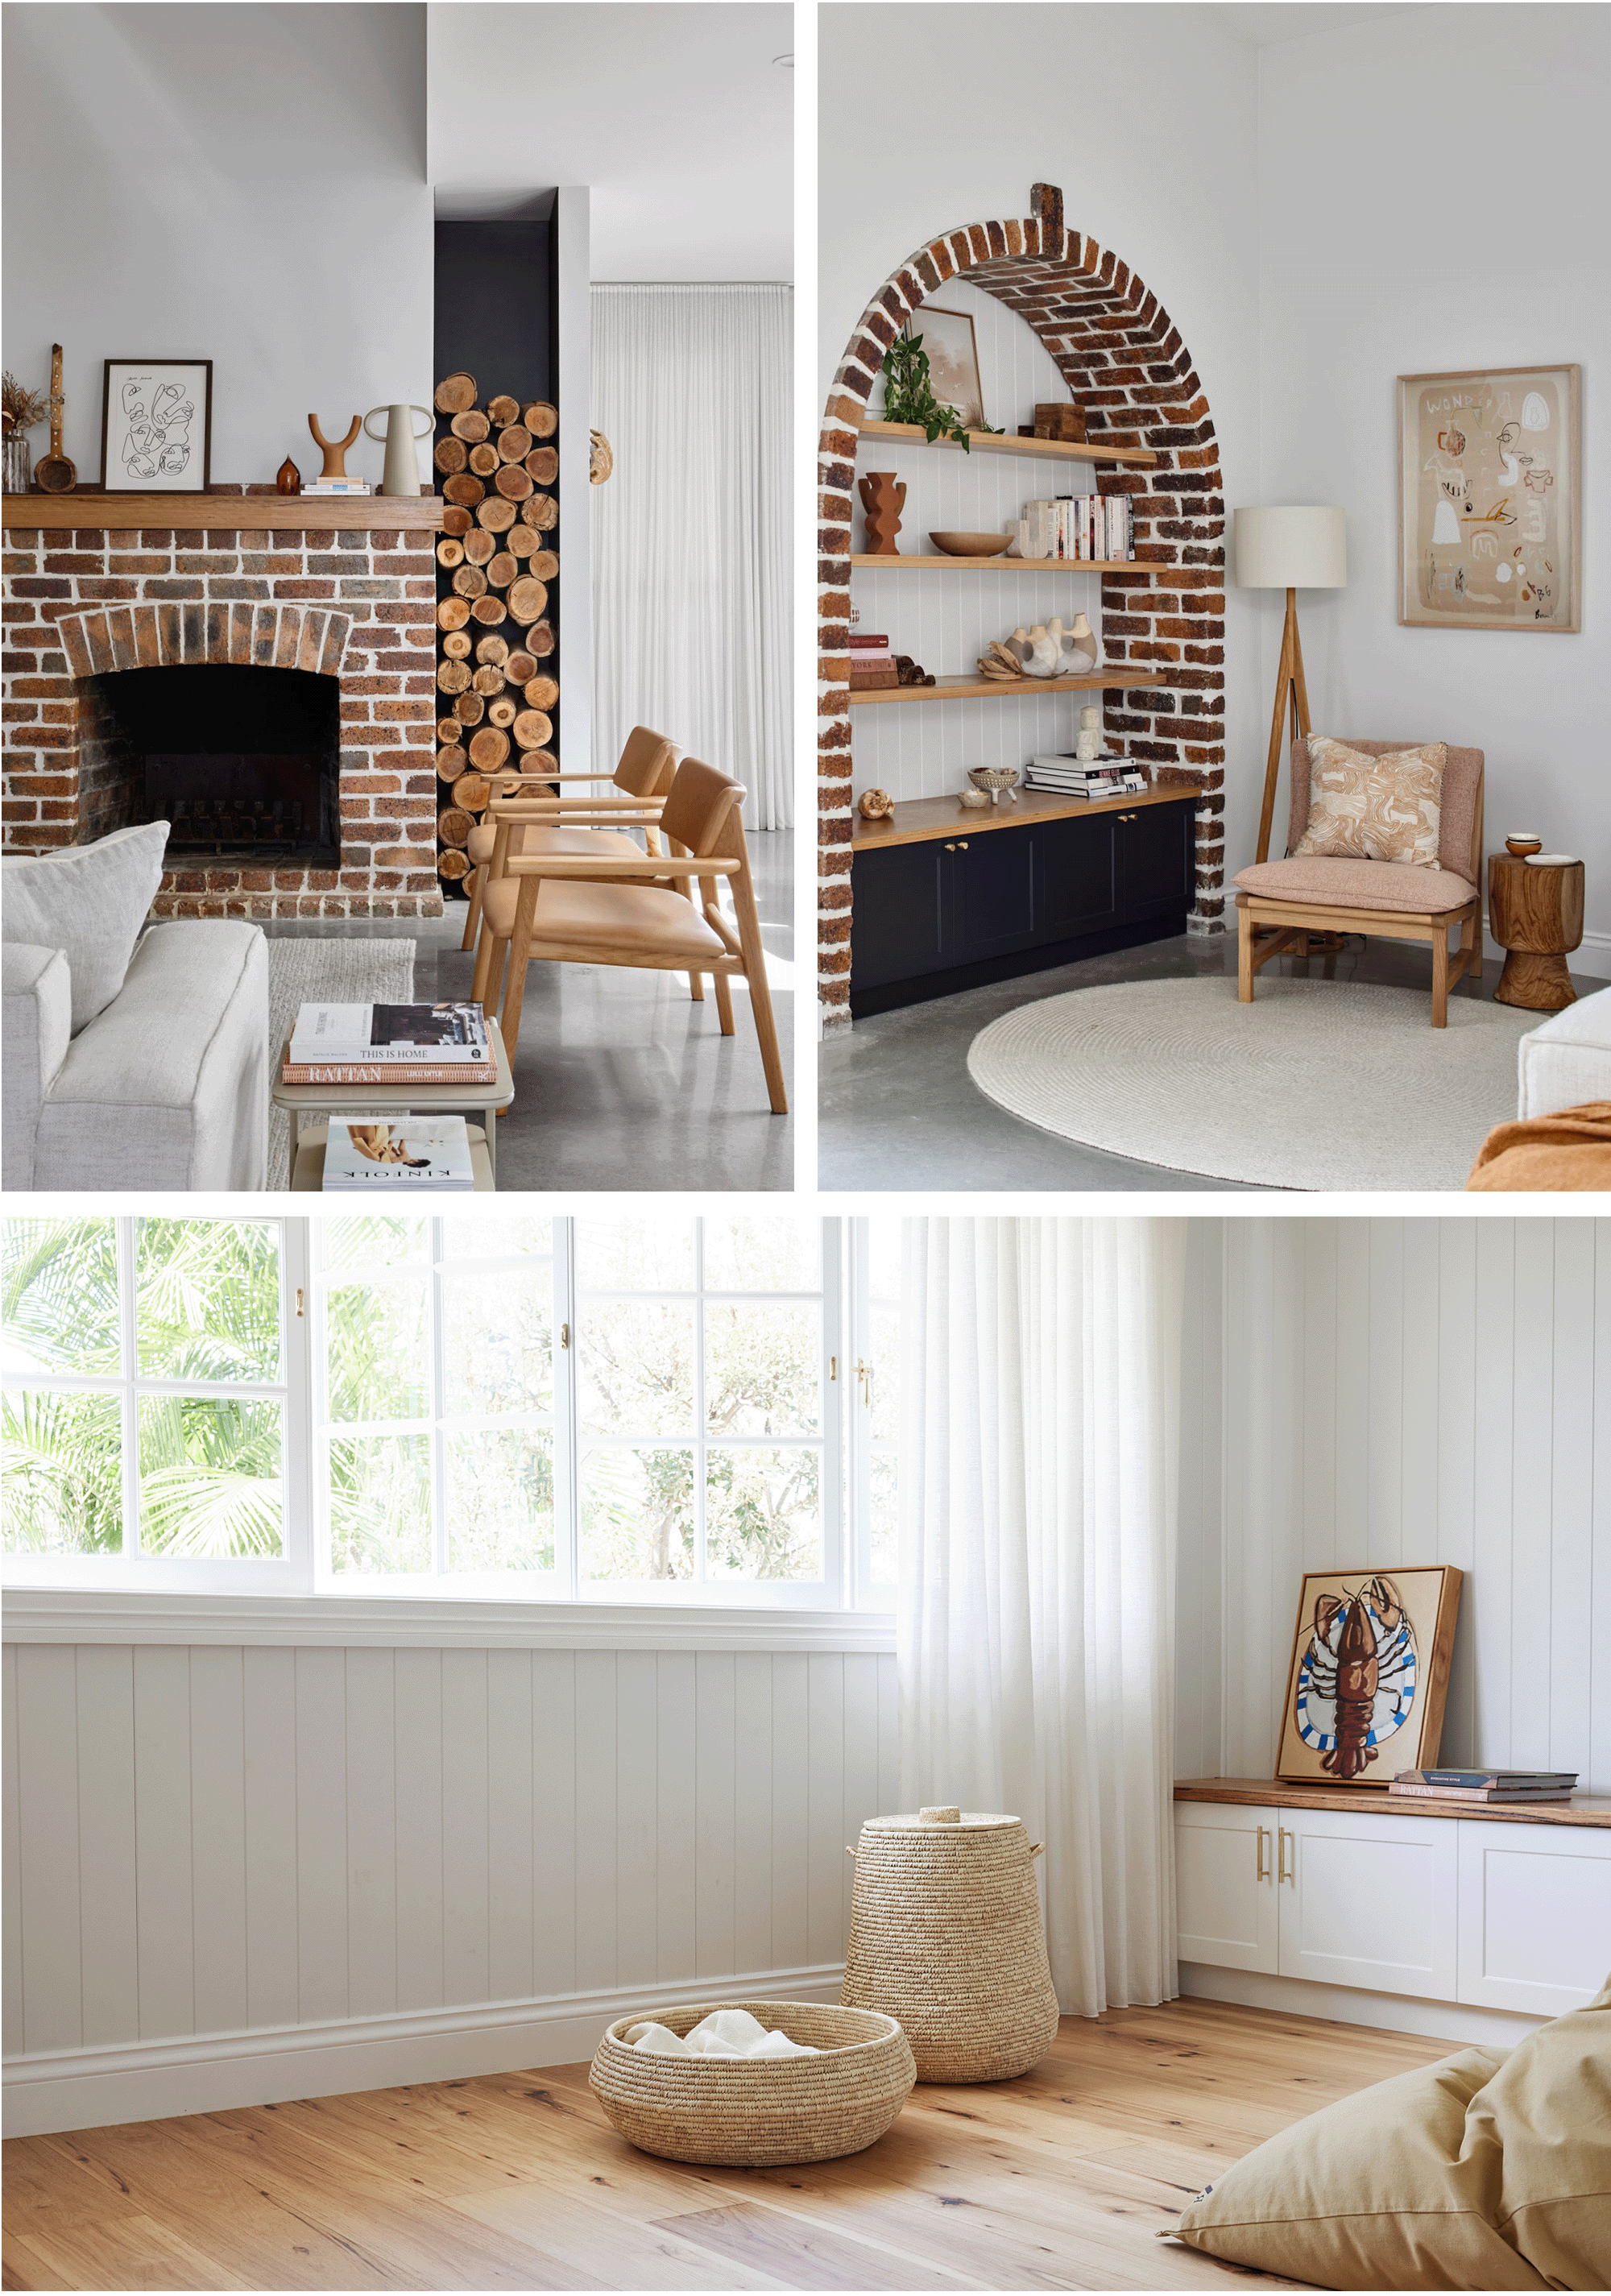 living areas featuring brick arch and fireplace, traditional cottage elements and woven baskets